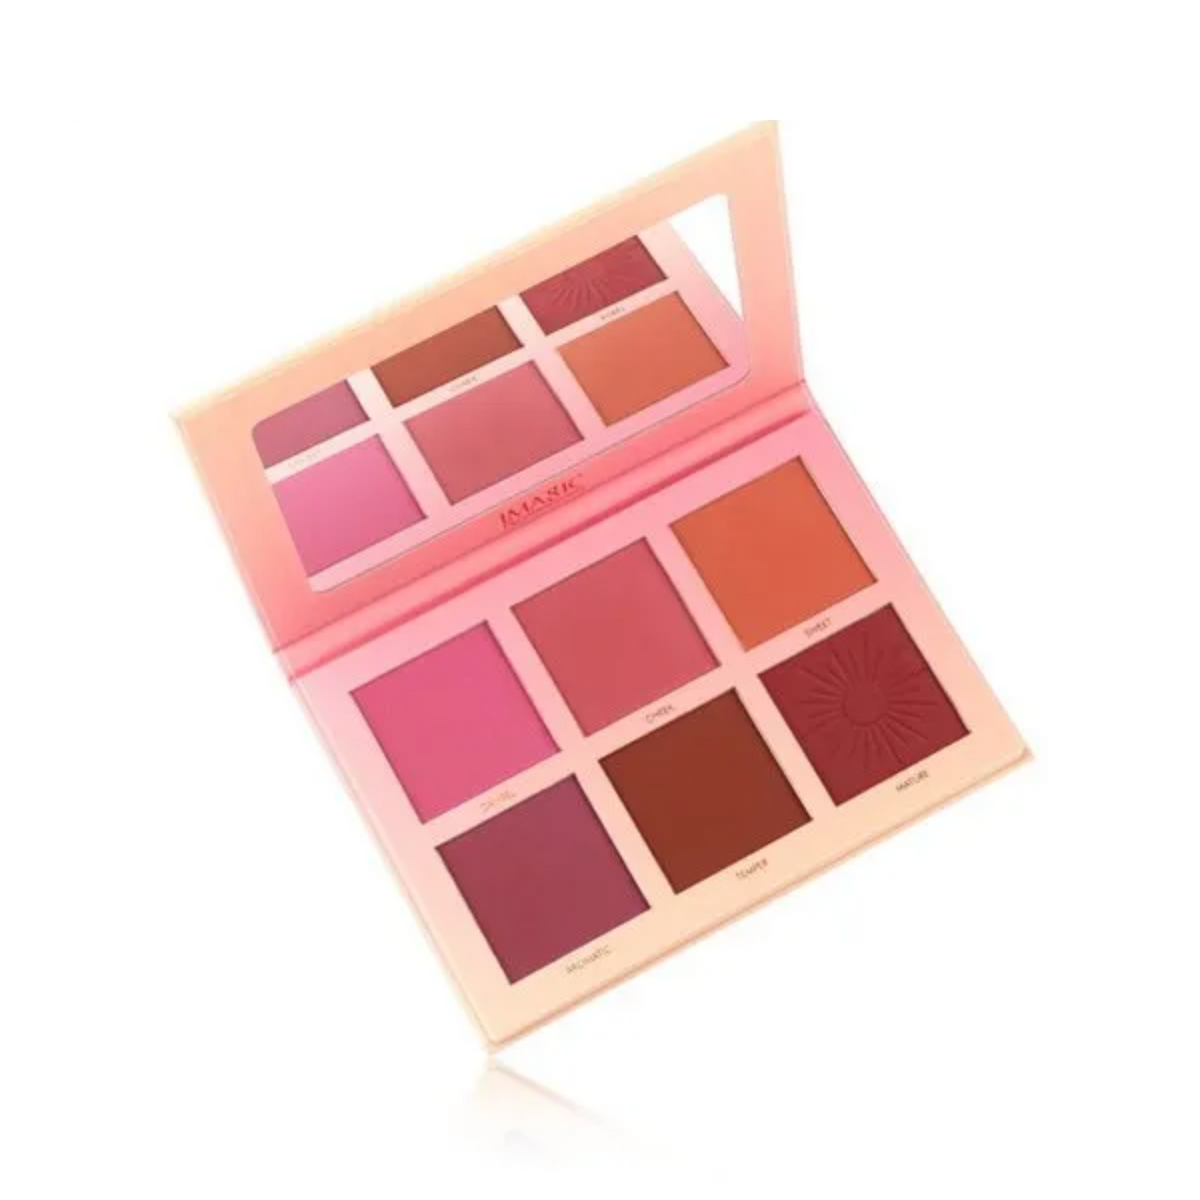 Imagic Professional Cosmetics 6 Color Touch Blush Palette (42.8g) Imagic Professional Cosmetics